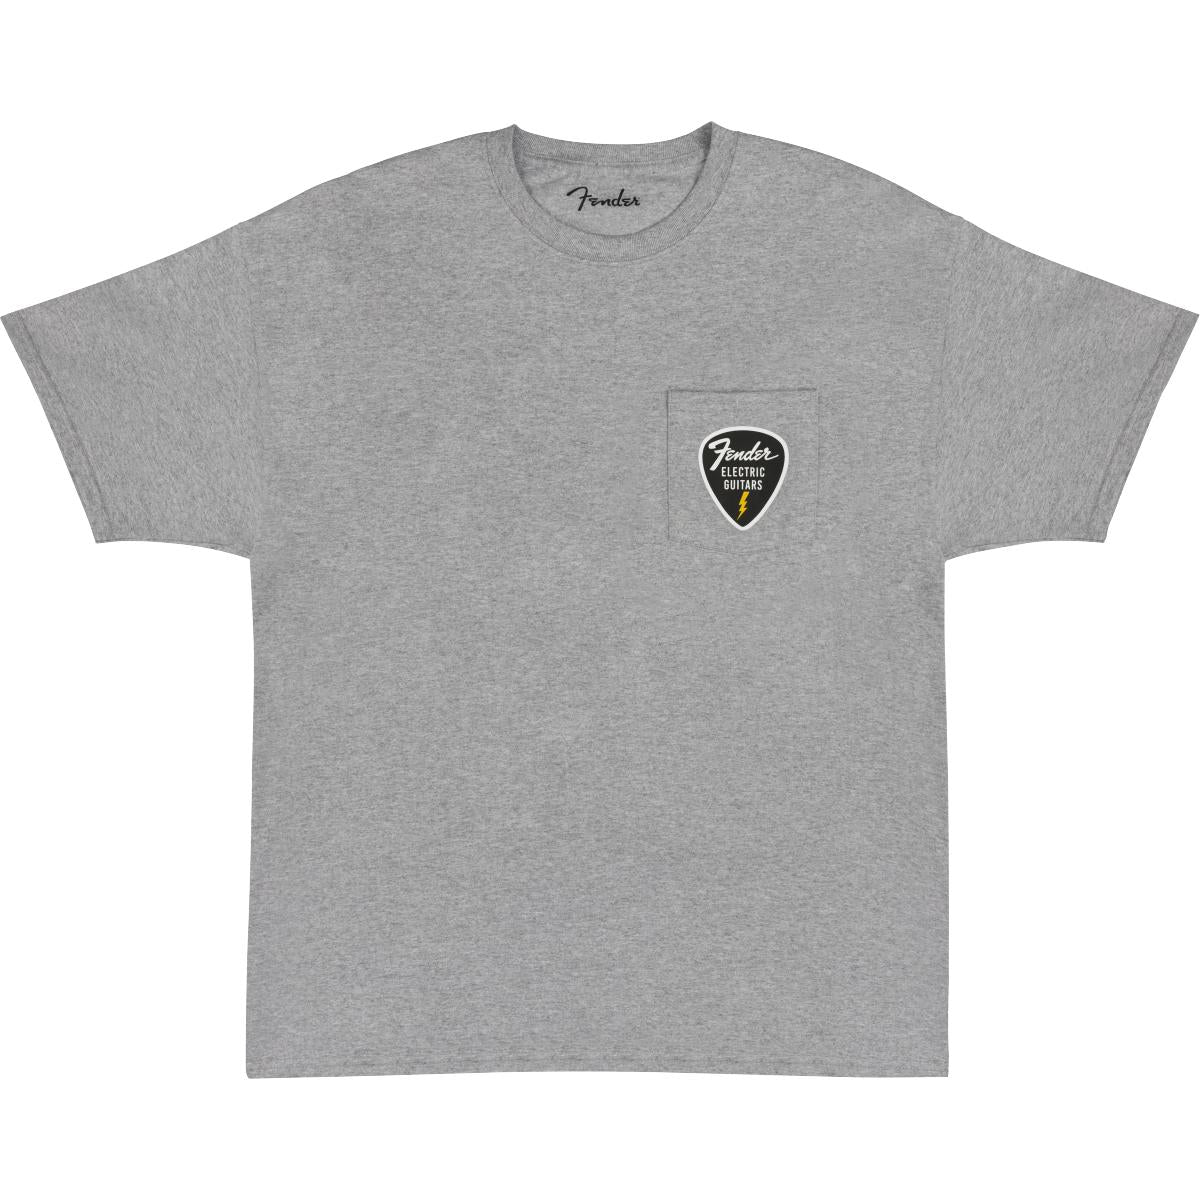 S-XXL Single pocket T-shirt Small pick patch: screen-printed heat transfer Black 100% cotton: Gray Heather 90% cotton 10% polyester Machine wash cold Tumble dry low Do not iron Do not bleach